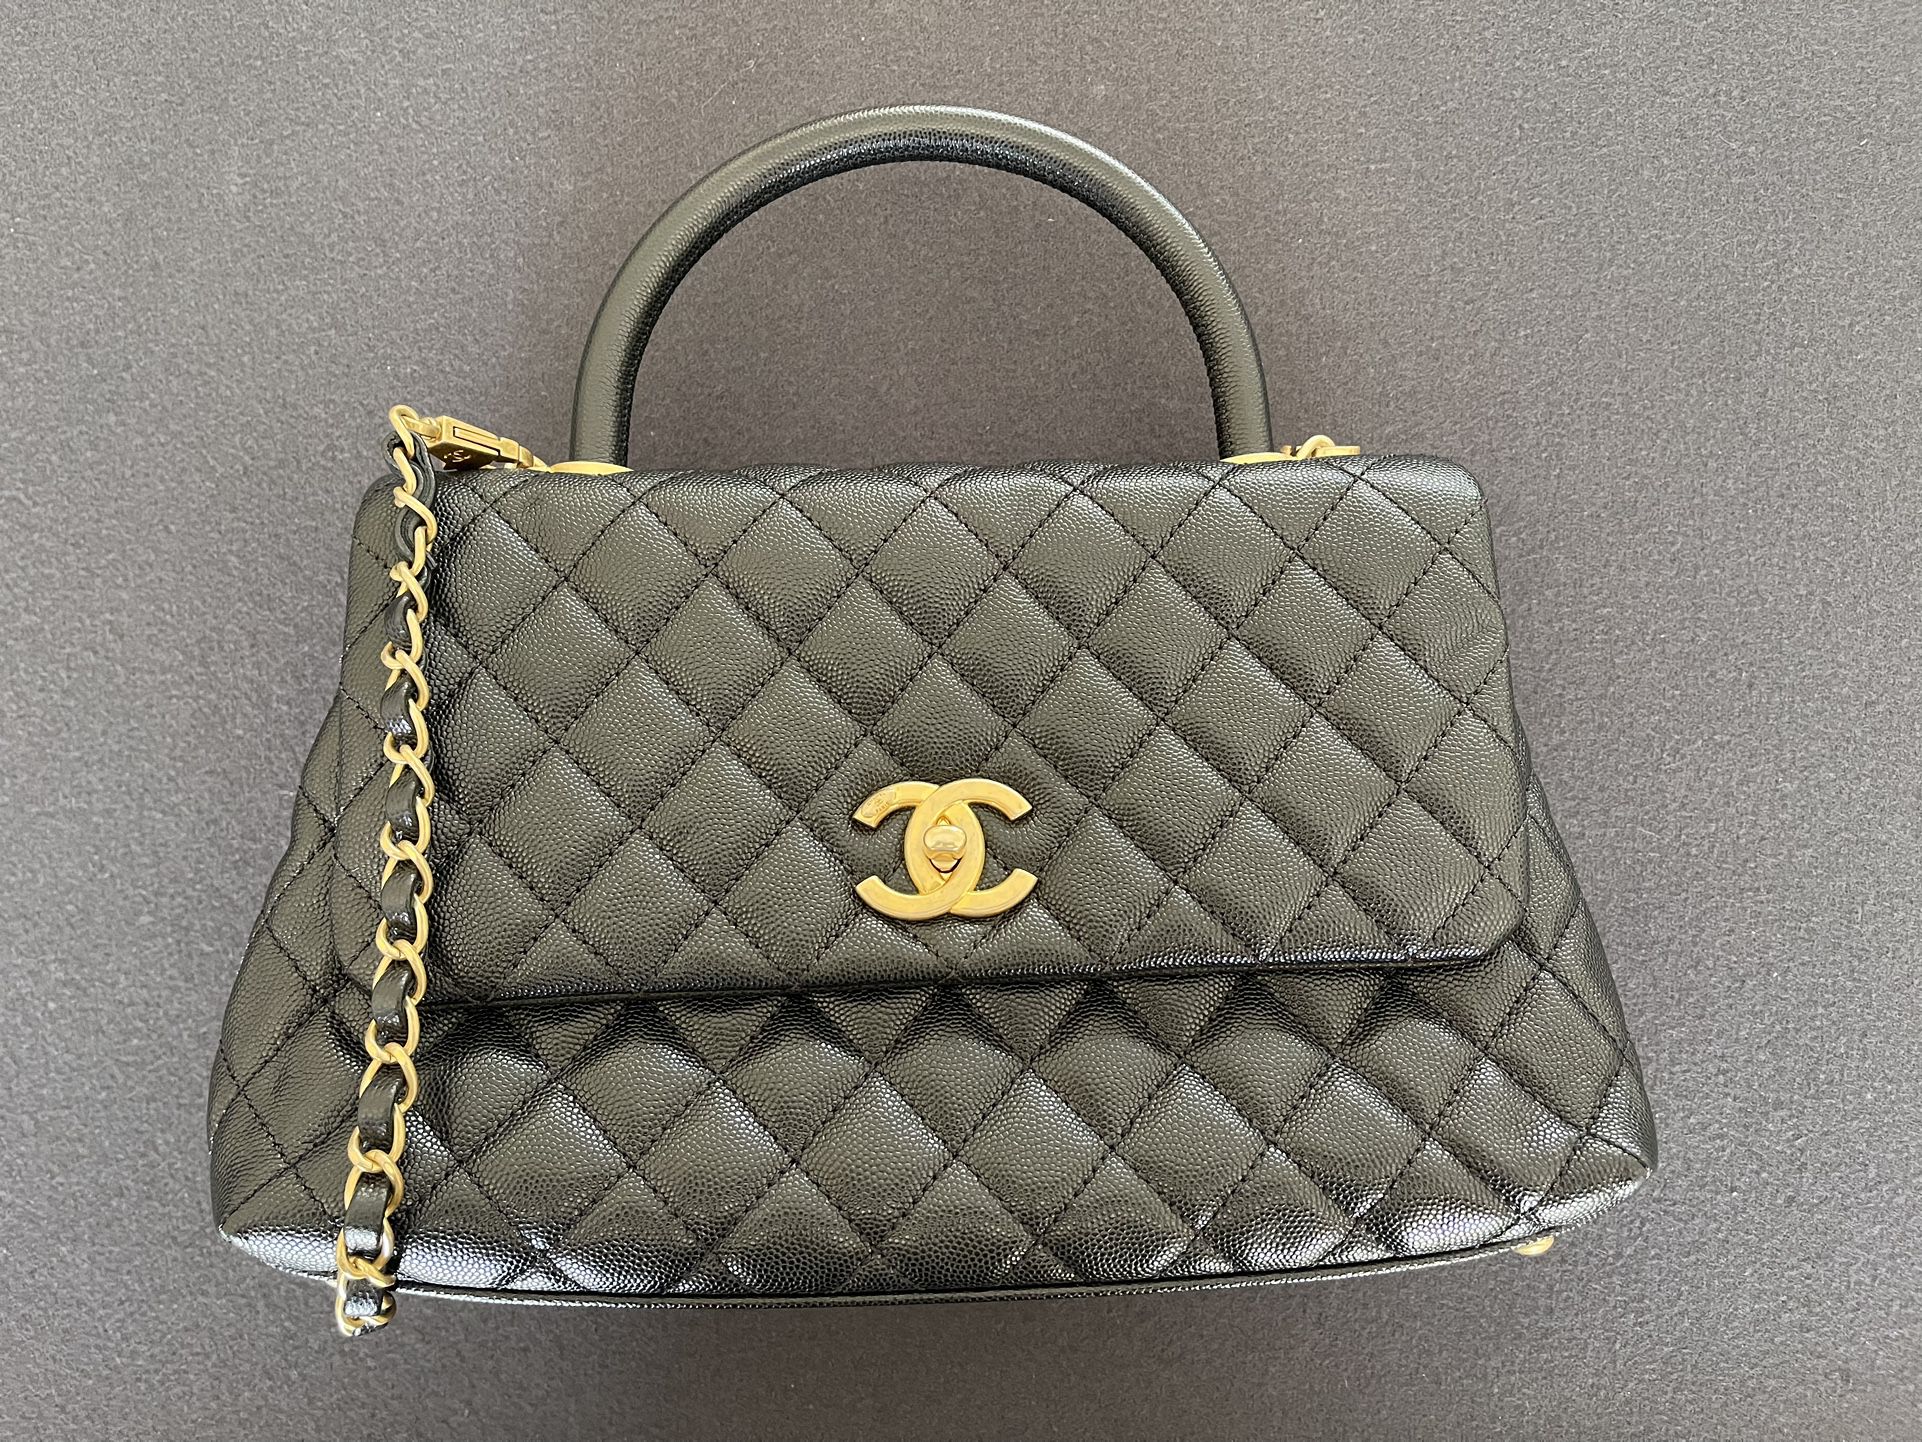 Chanel Large Flap Bag With Top Handle